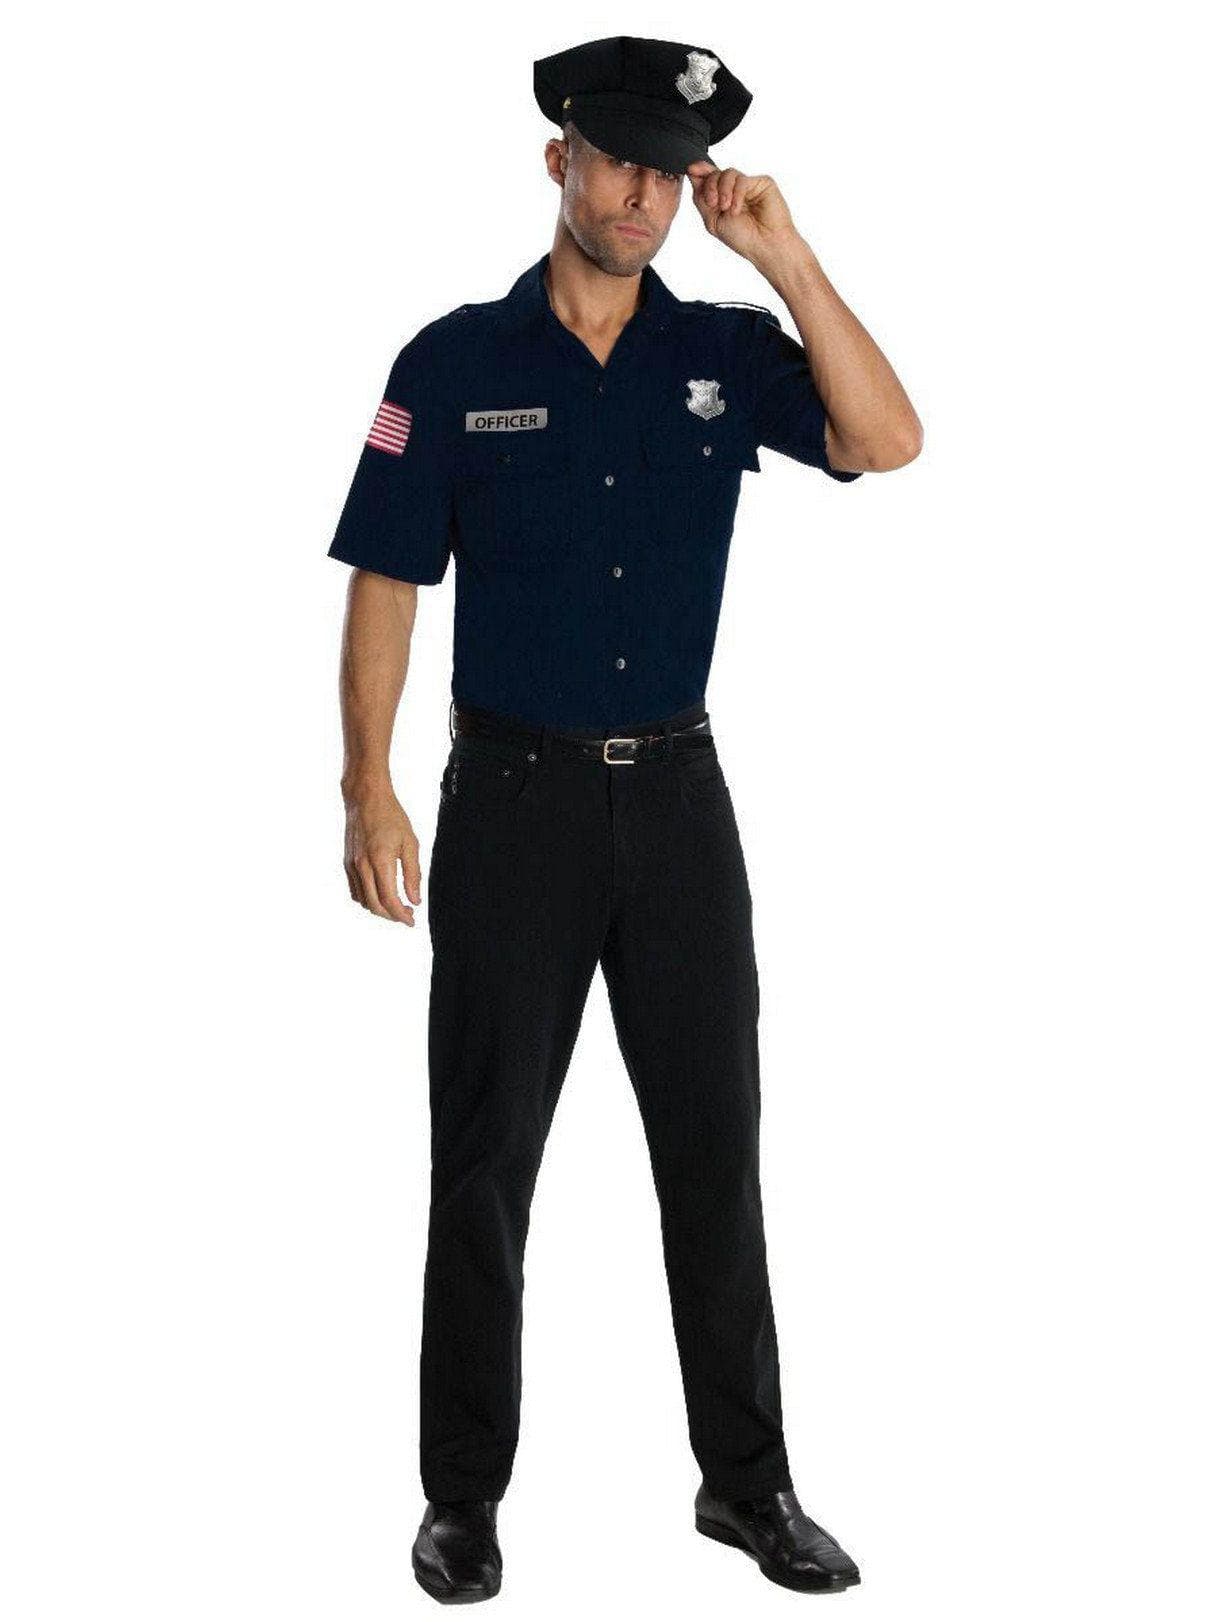 Adult Police Officer Blue Costume - costumes.com